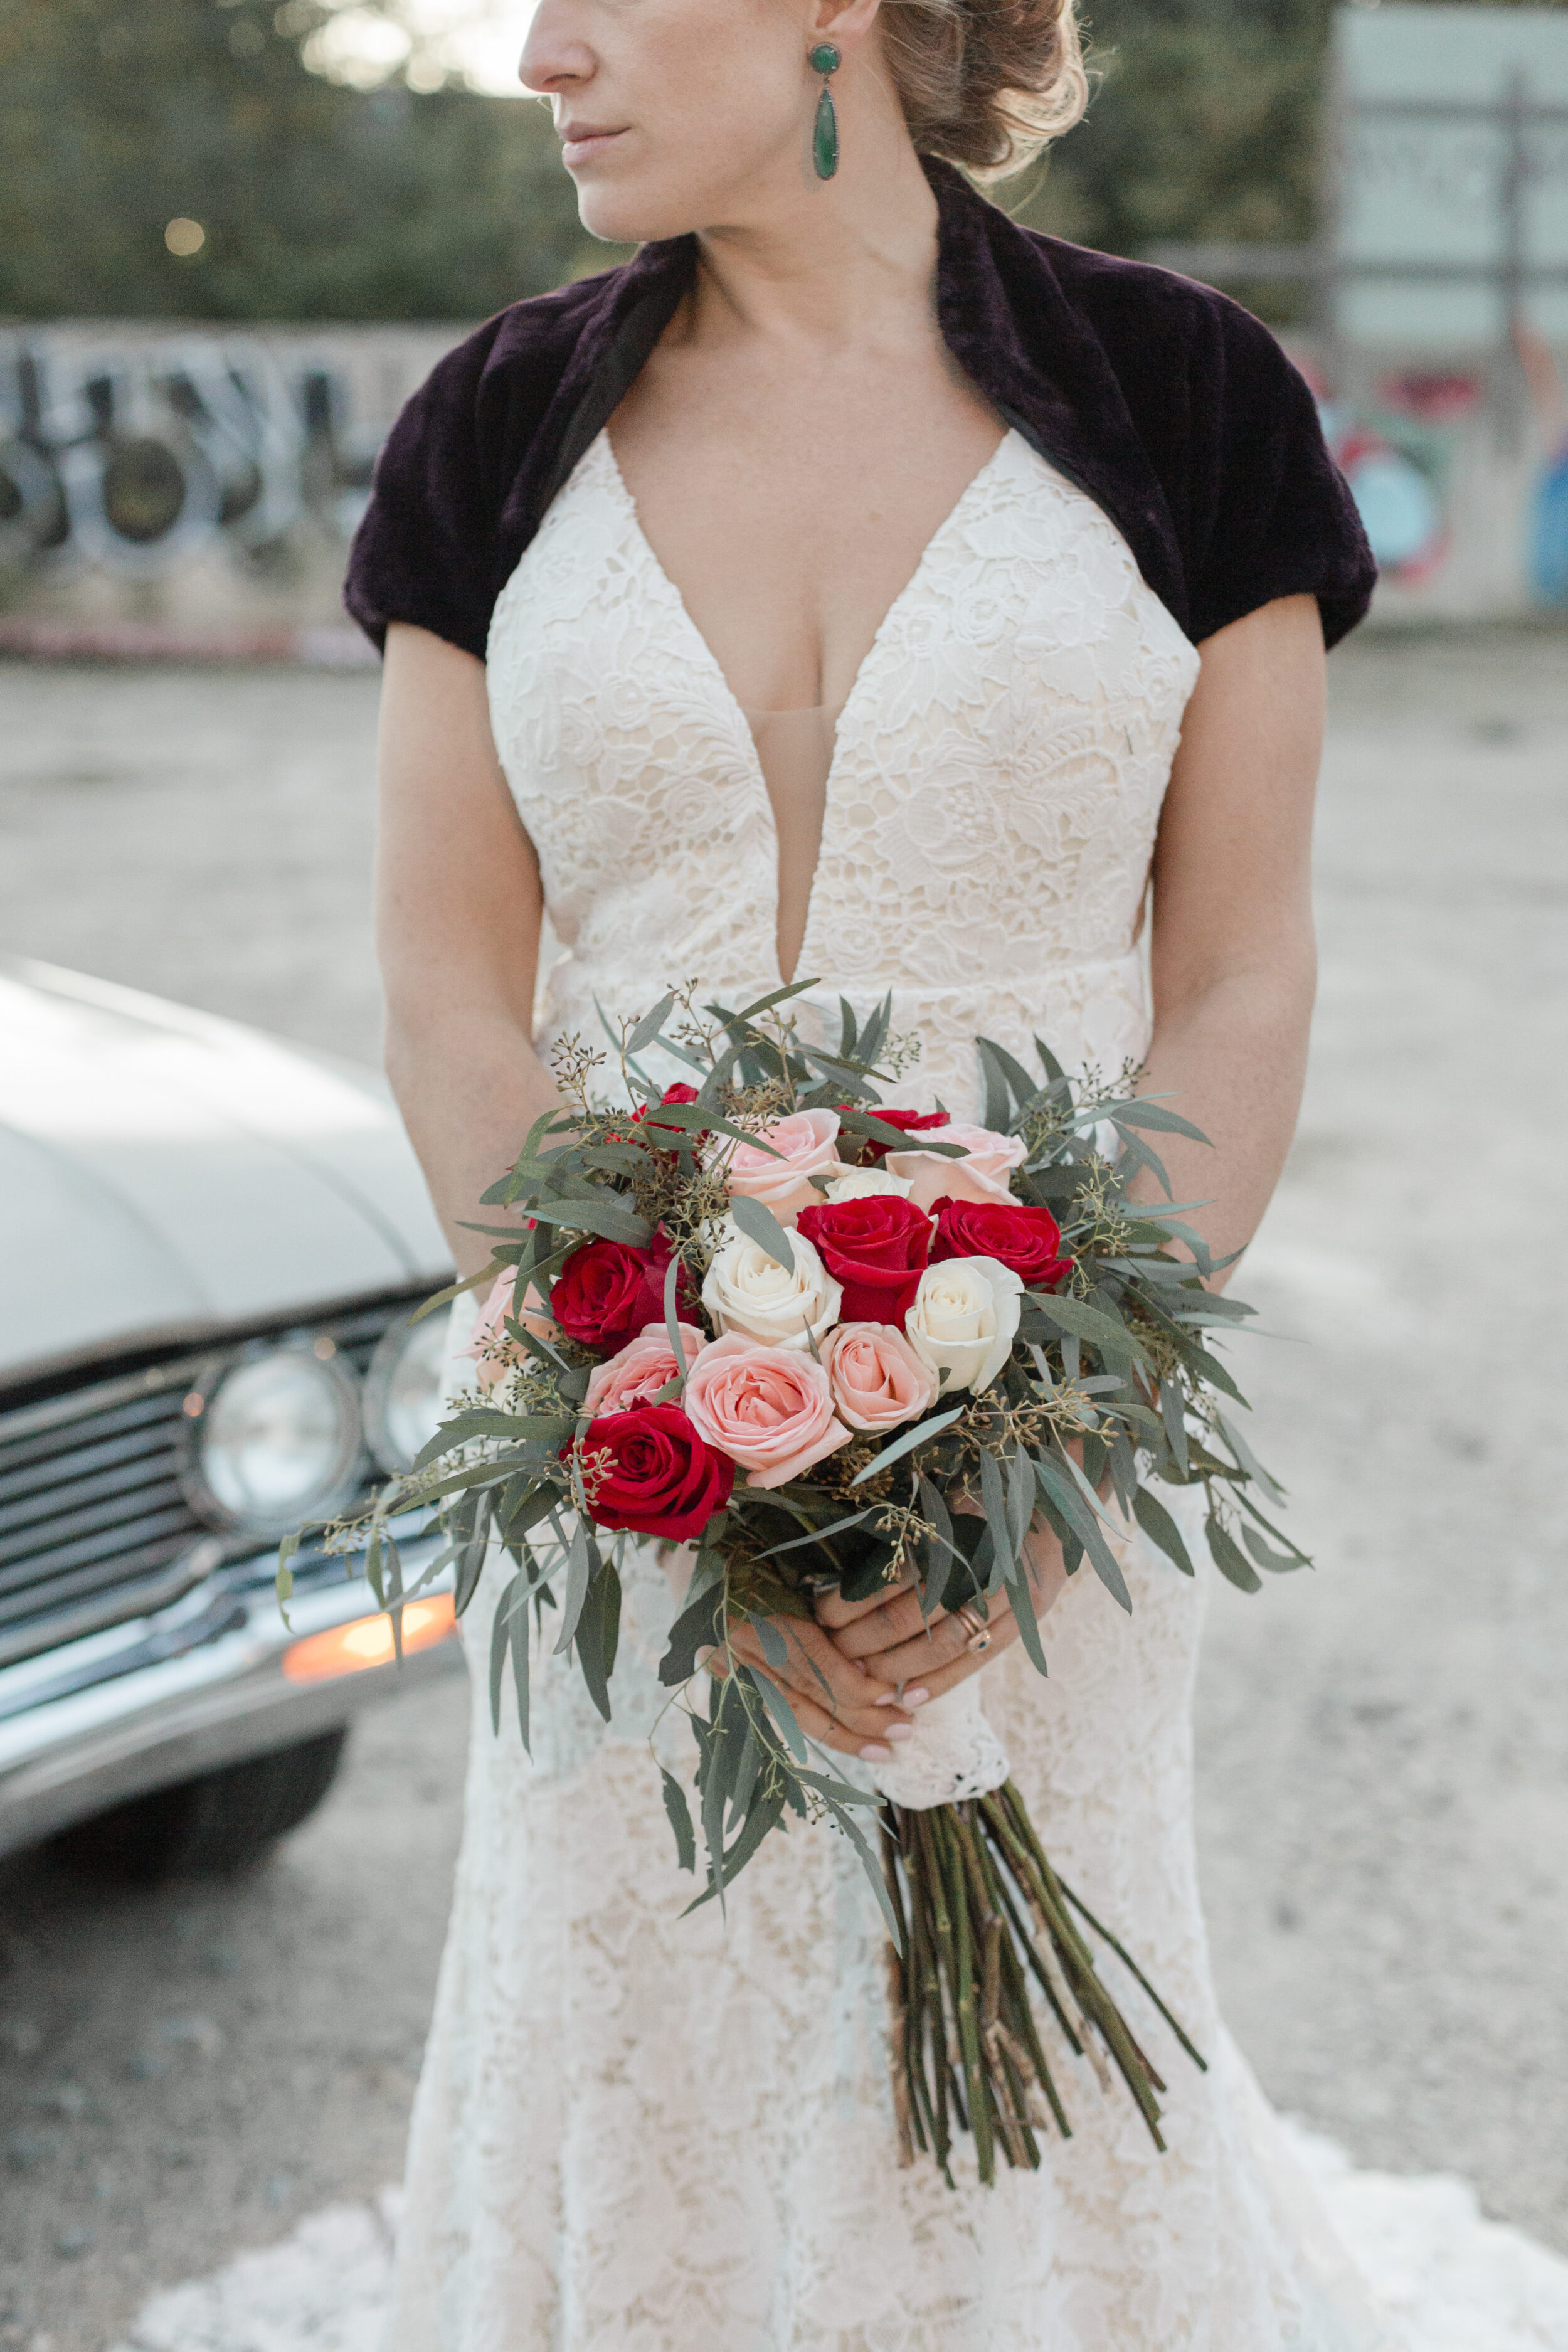 A bride holds a red, white and pink rose floral bridal bouquet.